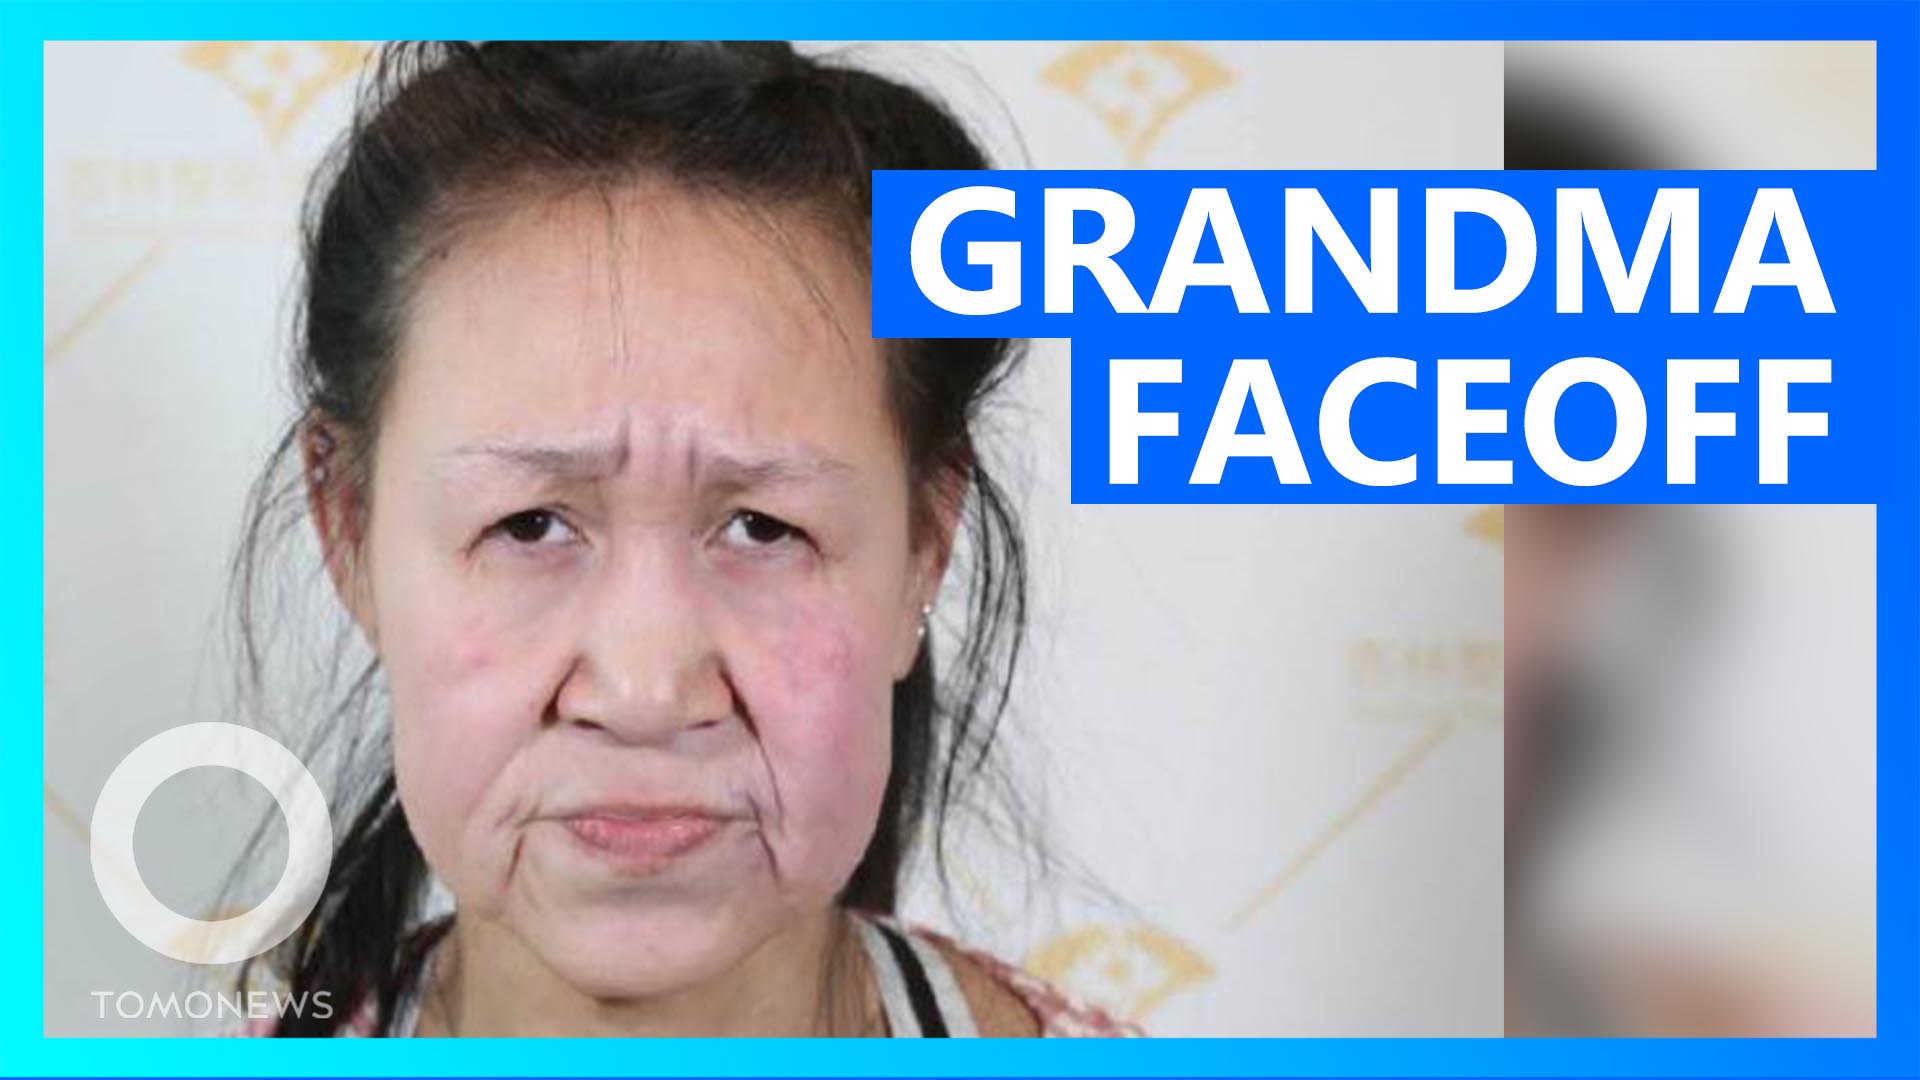 Chinese teen with grandmother face gets brand new mug